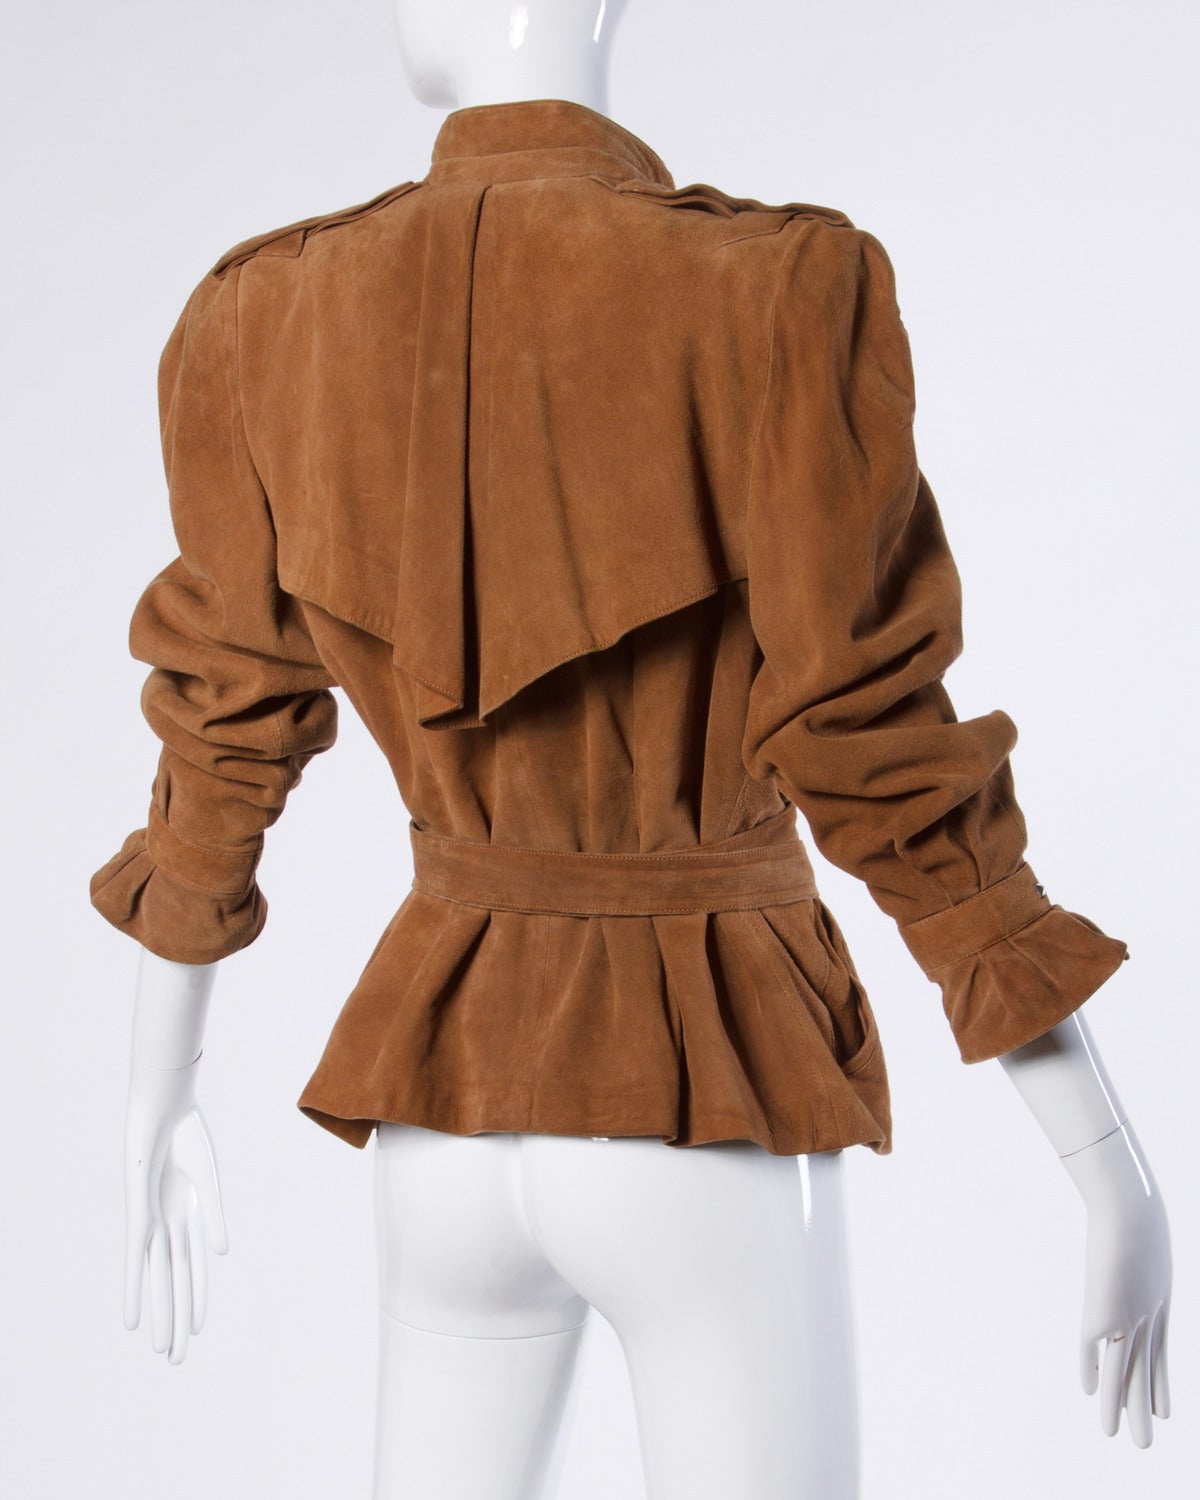 Vintage 1980s brown suede leather jacket by Claude Montana pour Ideal Cuir. Silver avant garde hardware and bold shoulders. Iconic Claude Montana silhouette.

Details:

Fully Lined
Front Pockets/ Chest Pocket
Attached Matching Belt
Front Snap